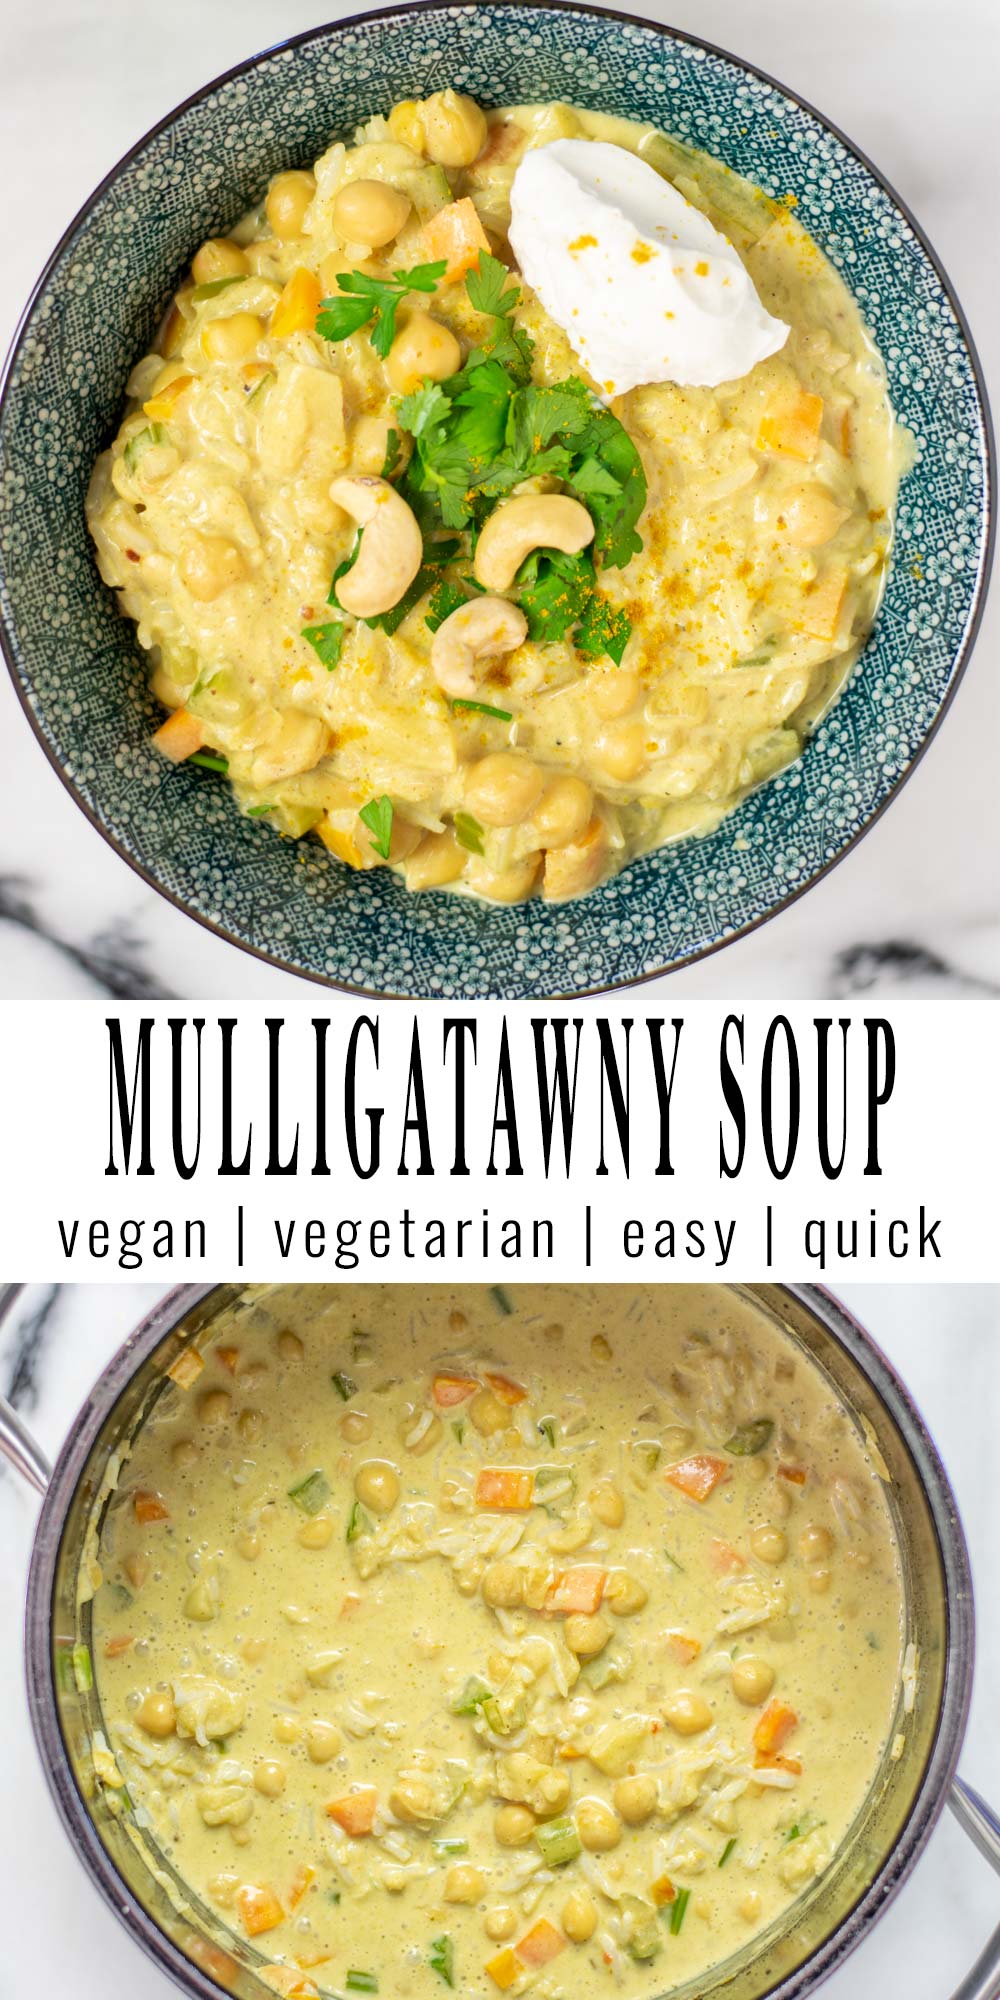 Collage of two pictures of the Mulligatawny Soup with recipe title text.